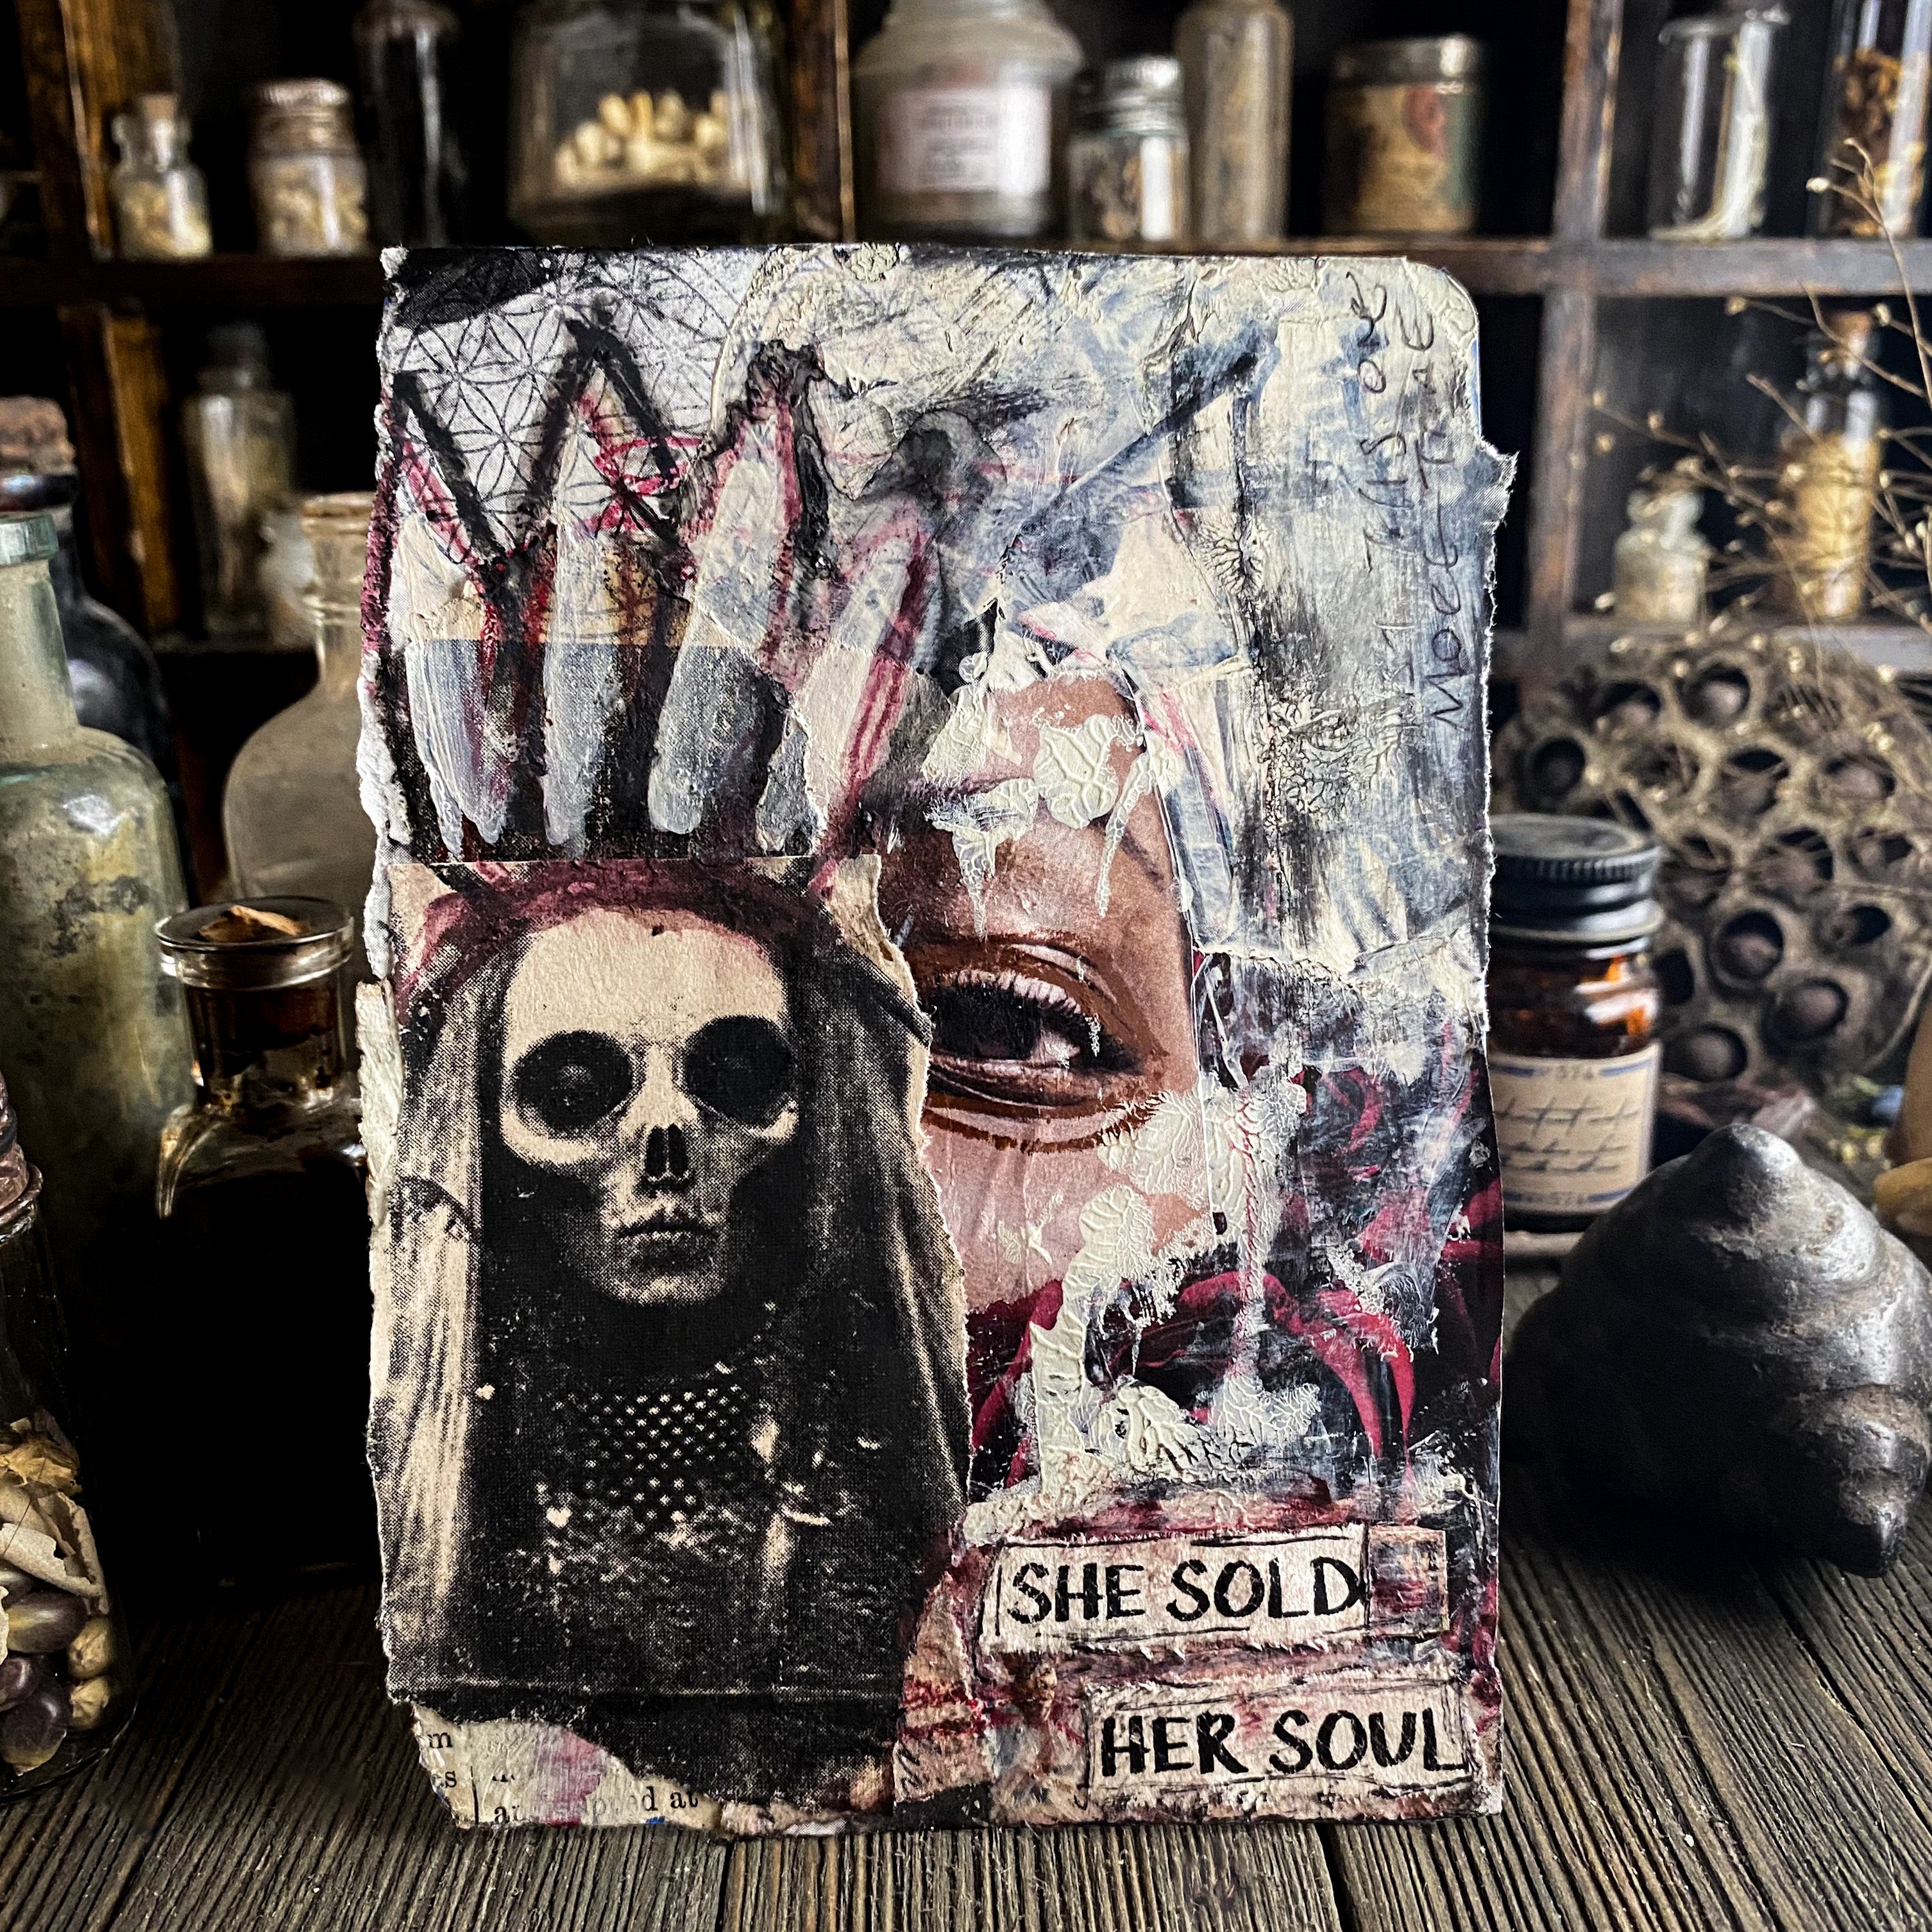 She Sold Her Soul - Original Mixed Media Collage